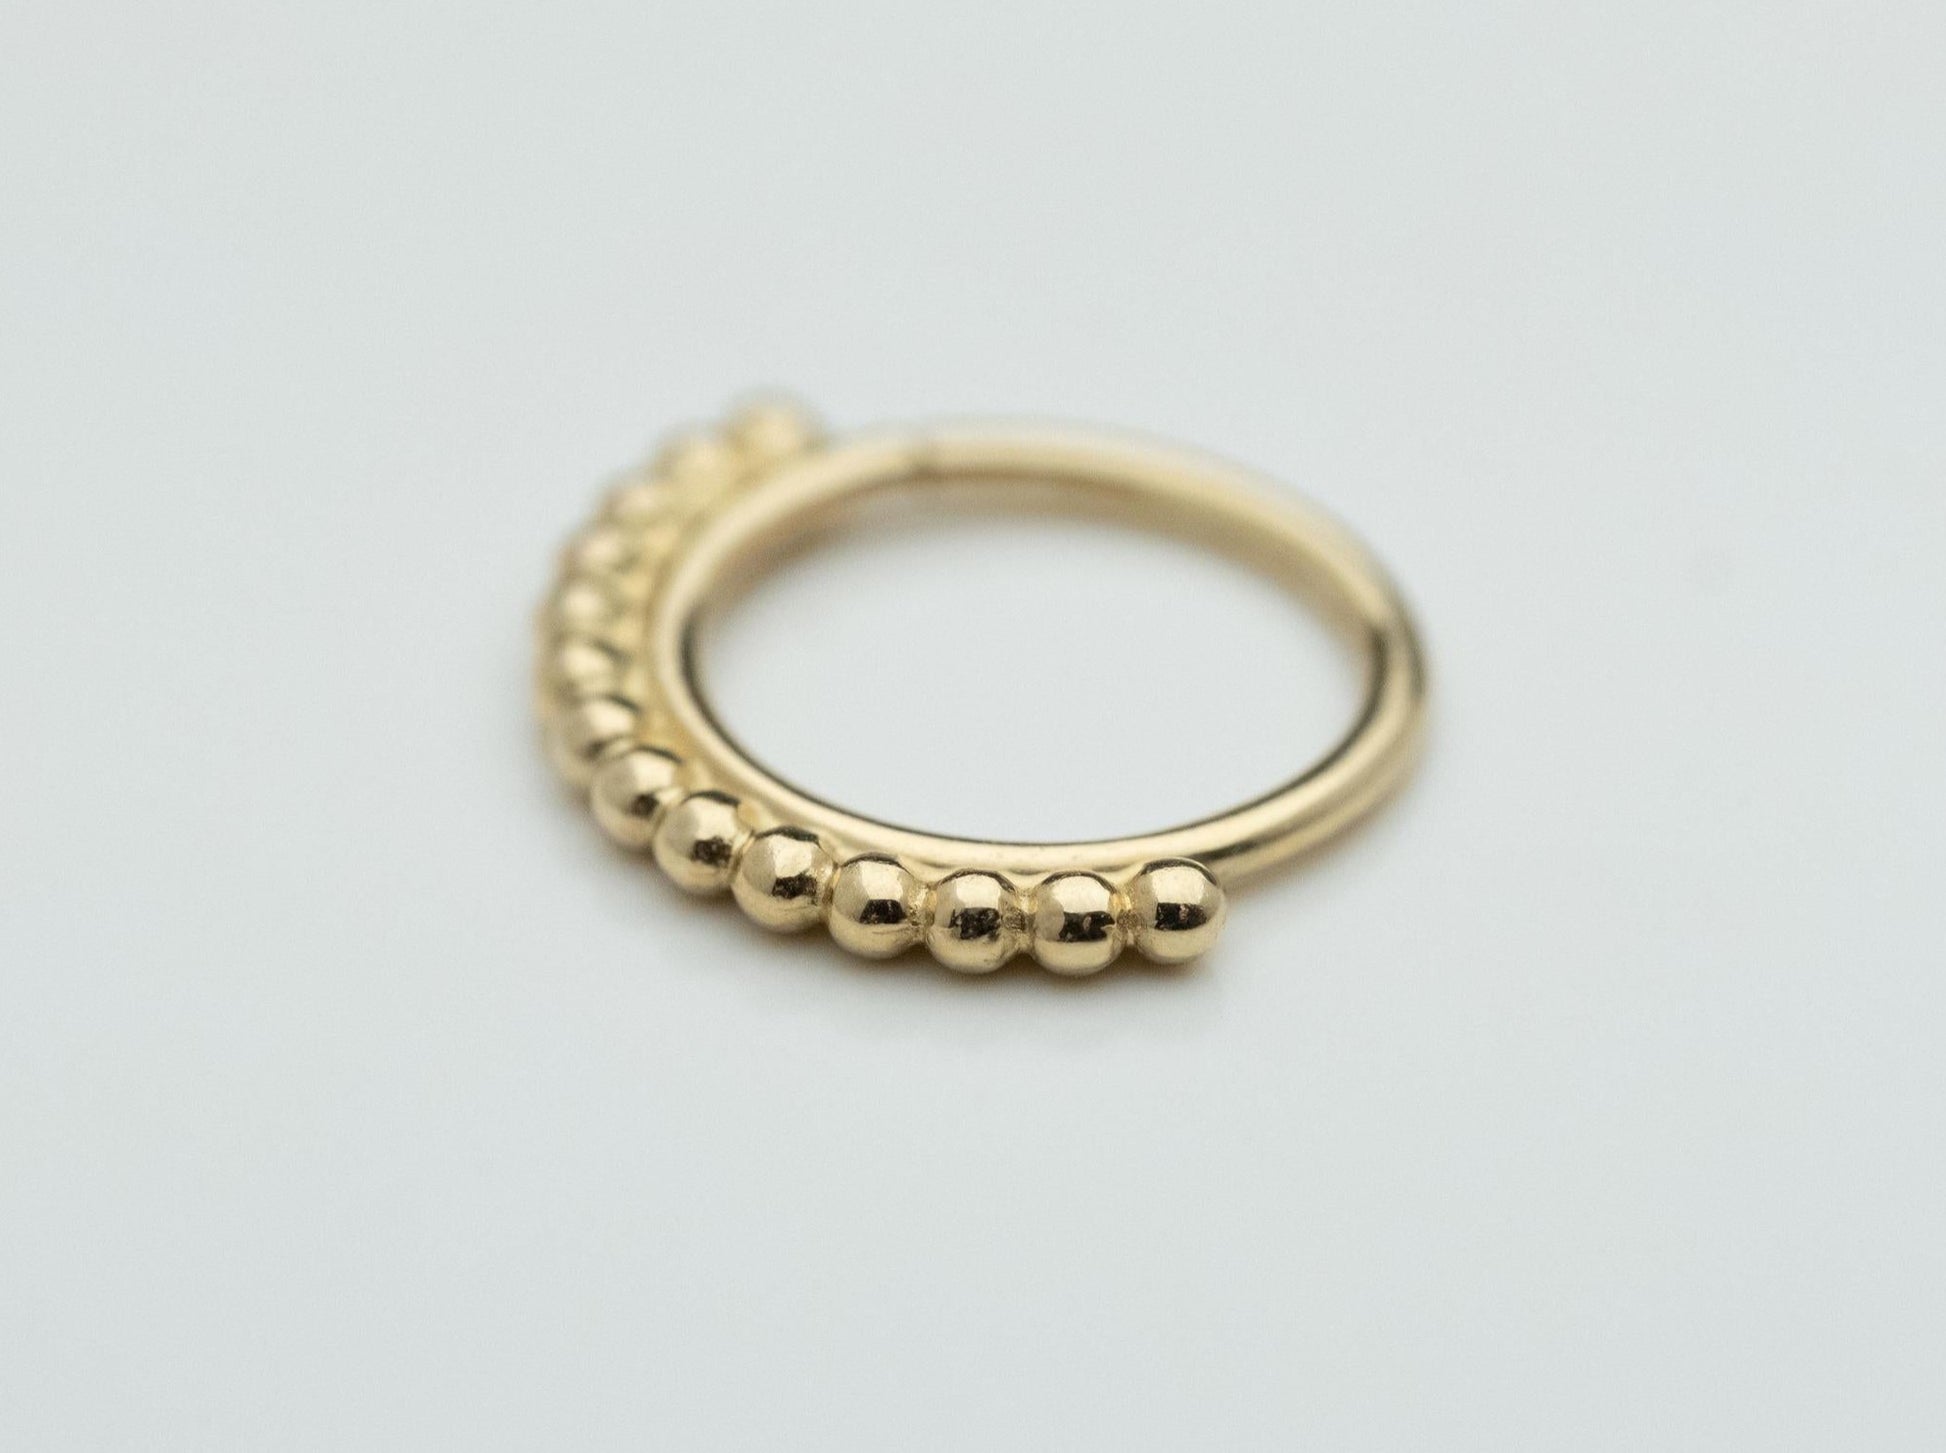 Latchmi Seam Ring in 14k Yellow Gold by BVLA